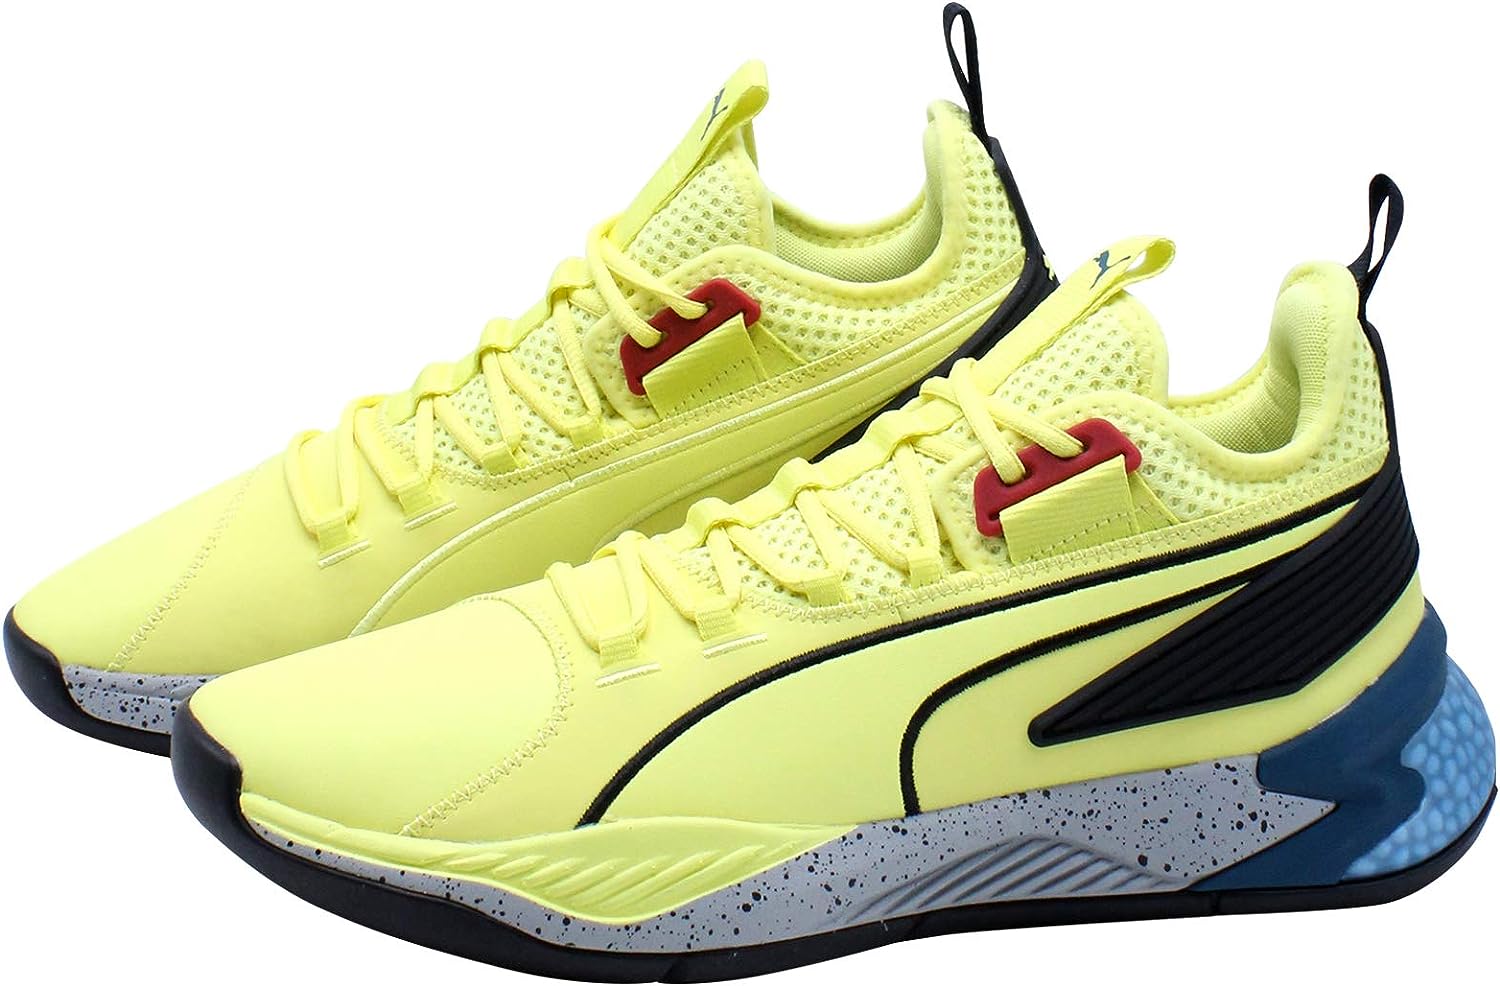 PUMA Mens Uproar Spectra Basketball Sneakers Shoes - Yellow